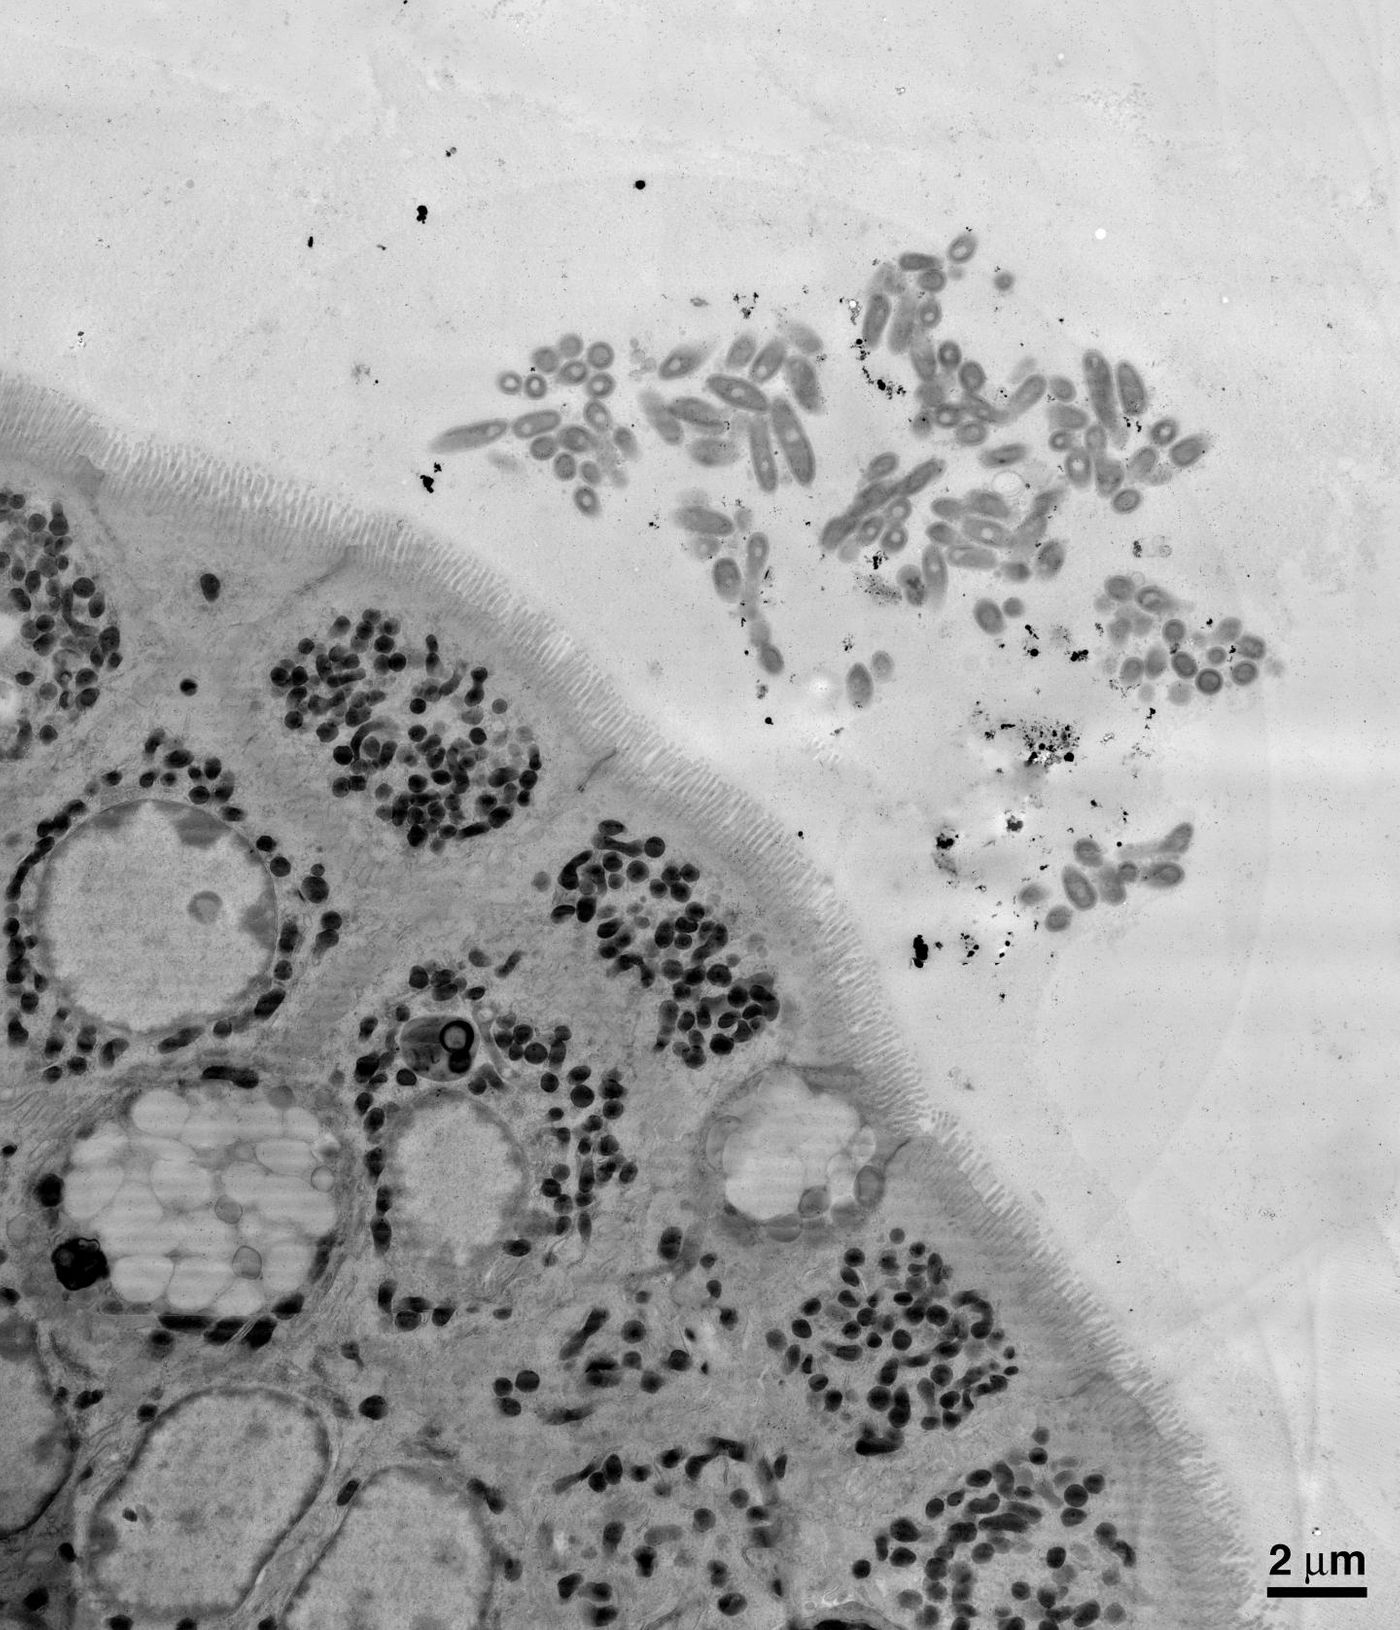 An electron microscopy image of a section of the mouse gut, showing B. fragilis aggregating close to the epithelial cells that make up the lining of the gut. / Credit: Courtesy of the Mazmanian laboratory